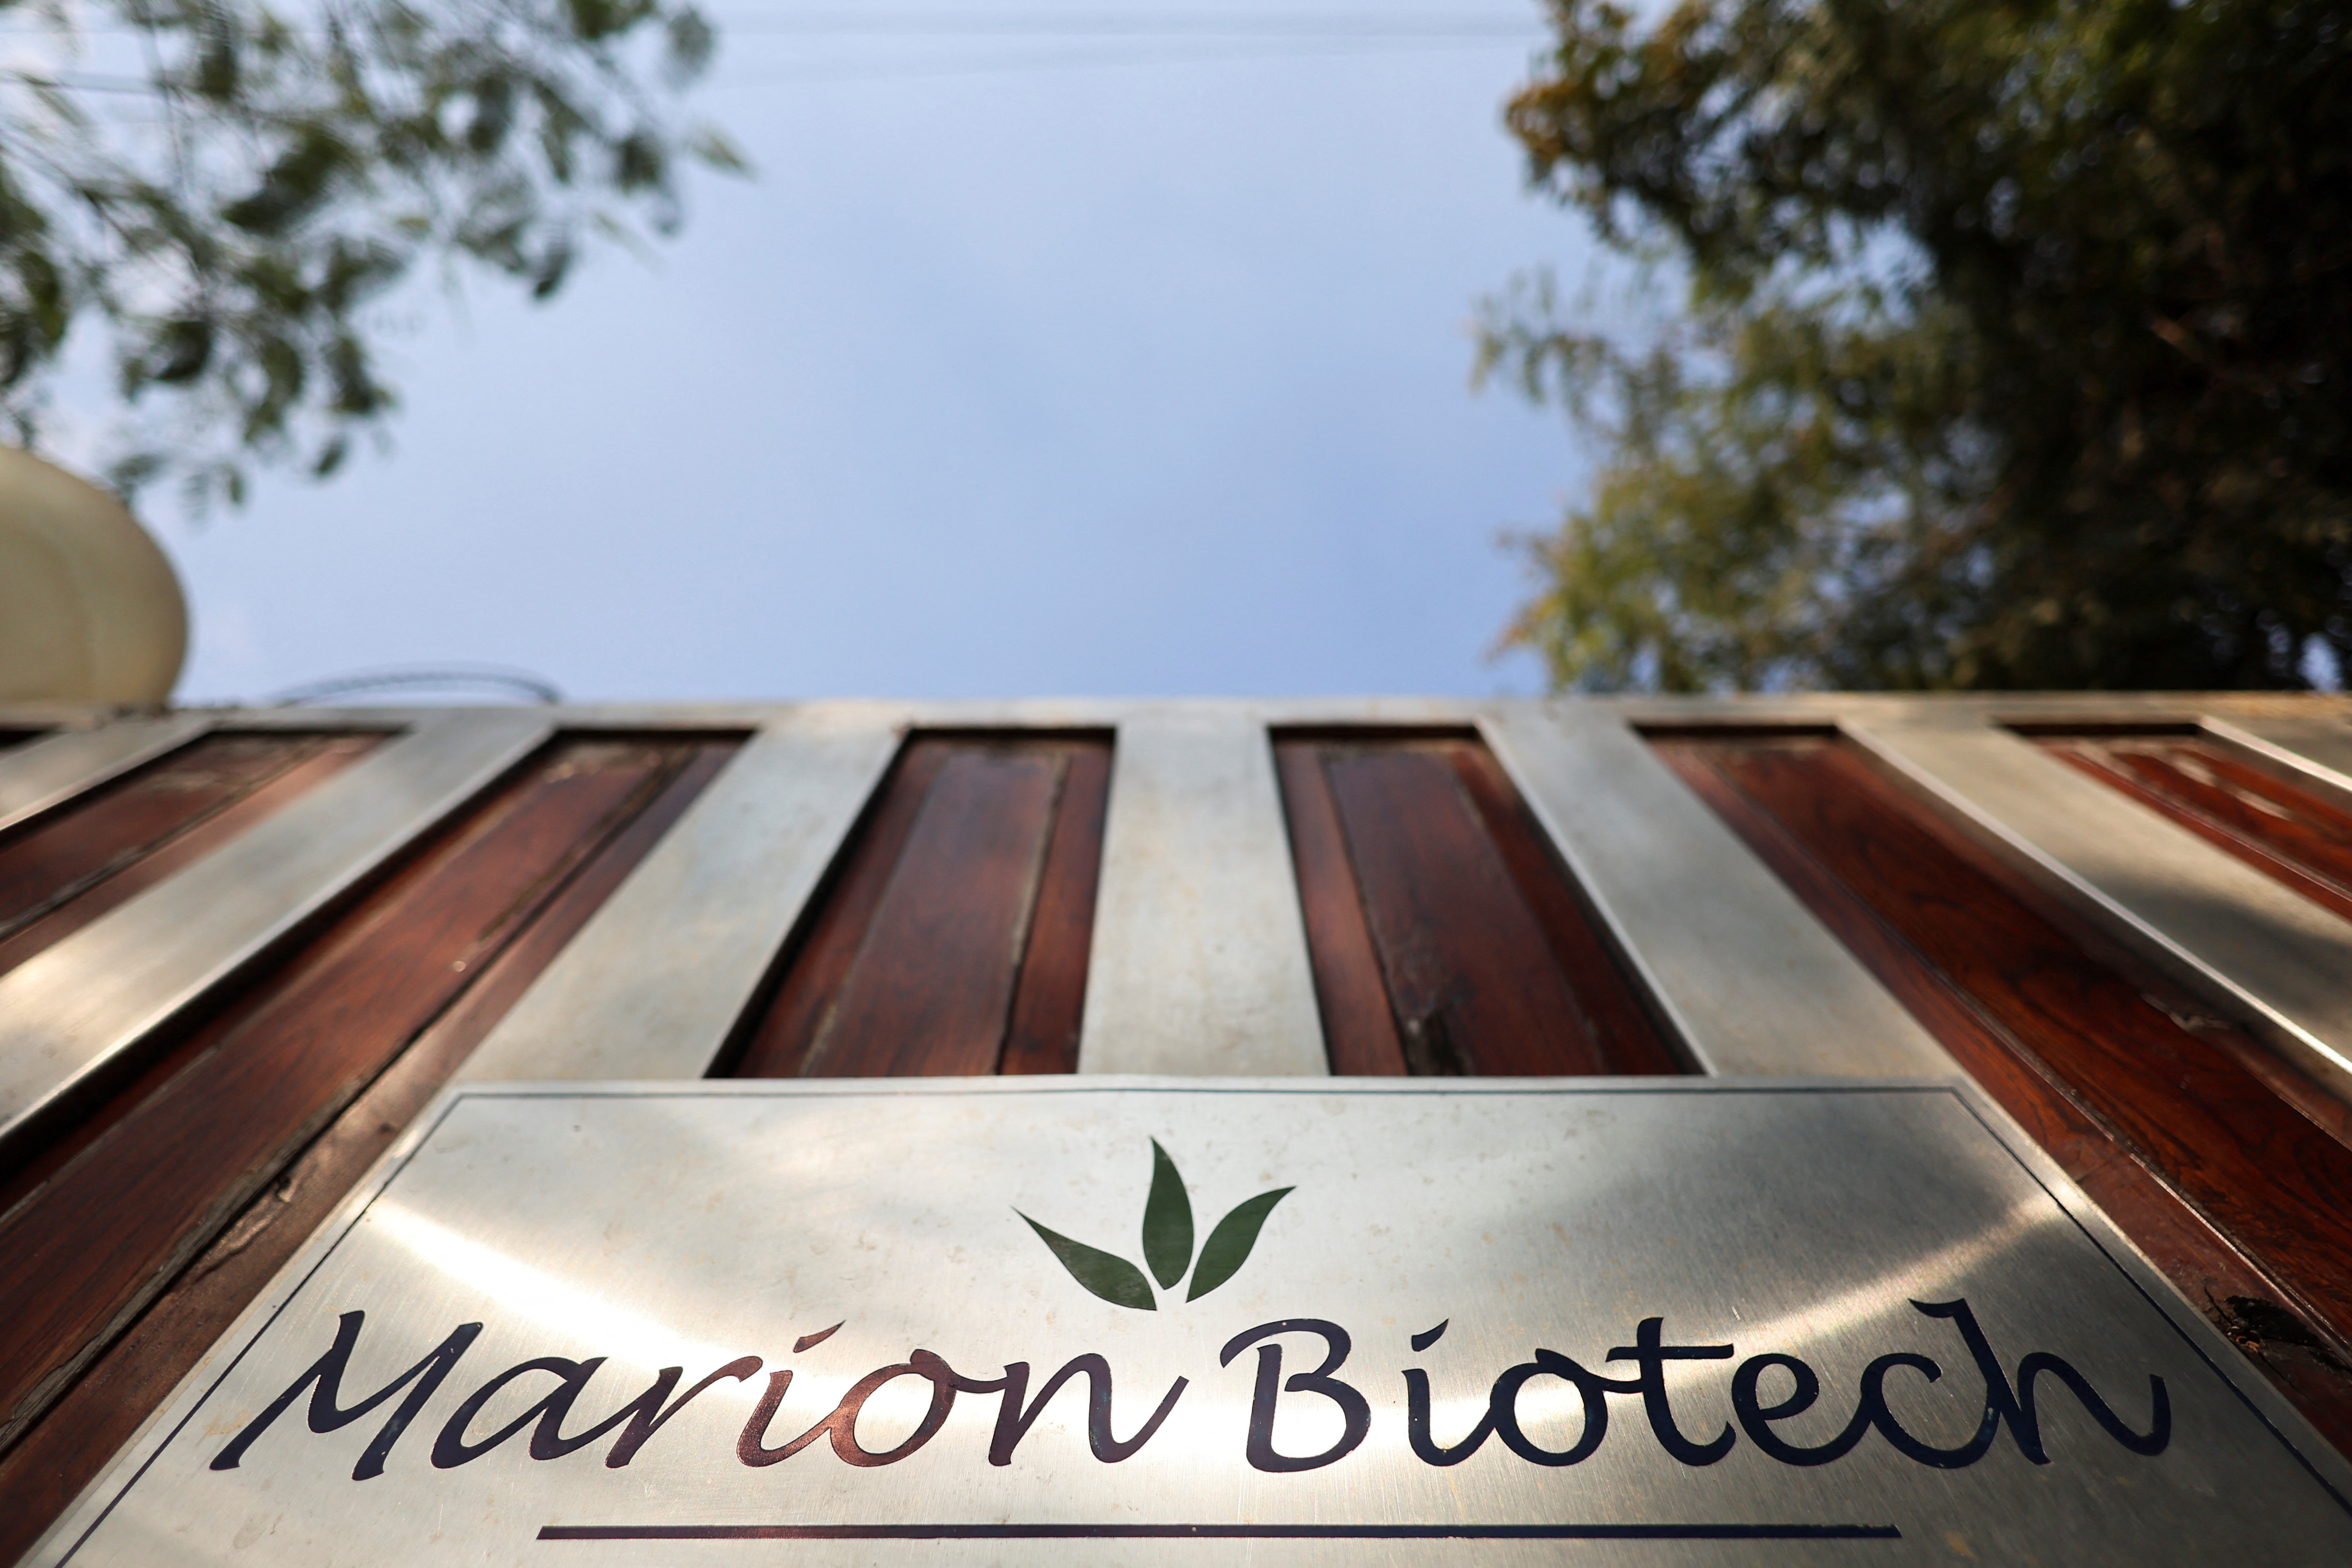 The logo of Marion Biotech, a healthcare and pharmaceutical company, is seen on a door outside their office in Noida